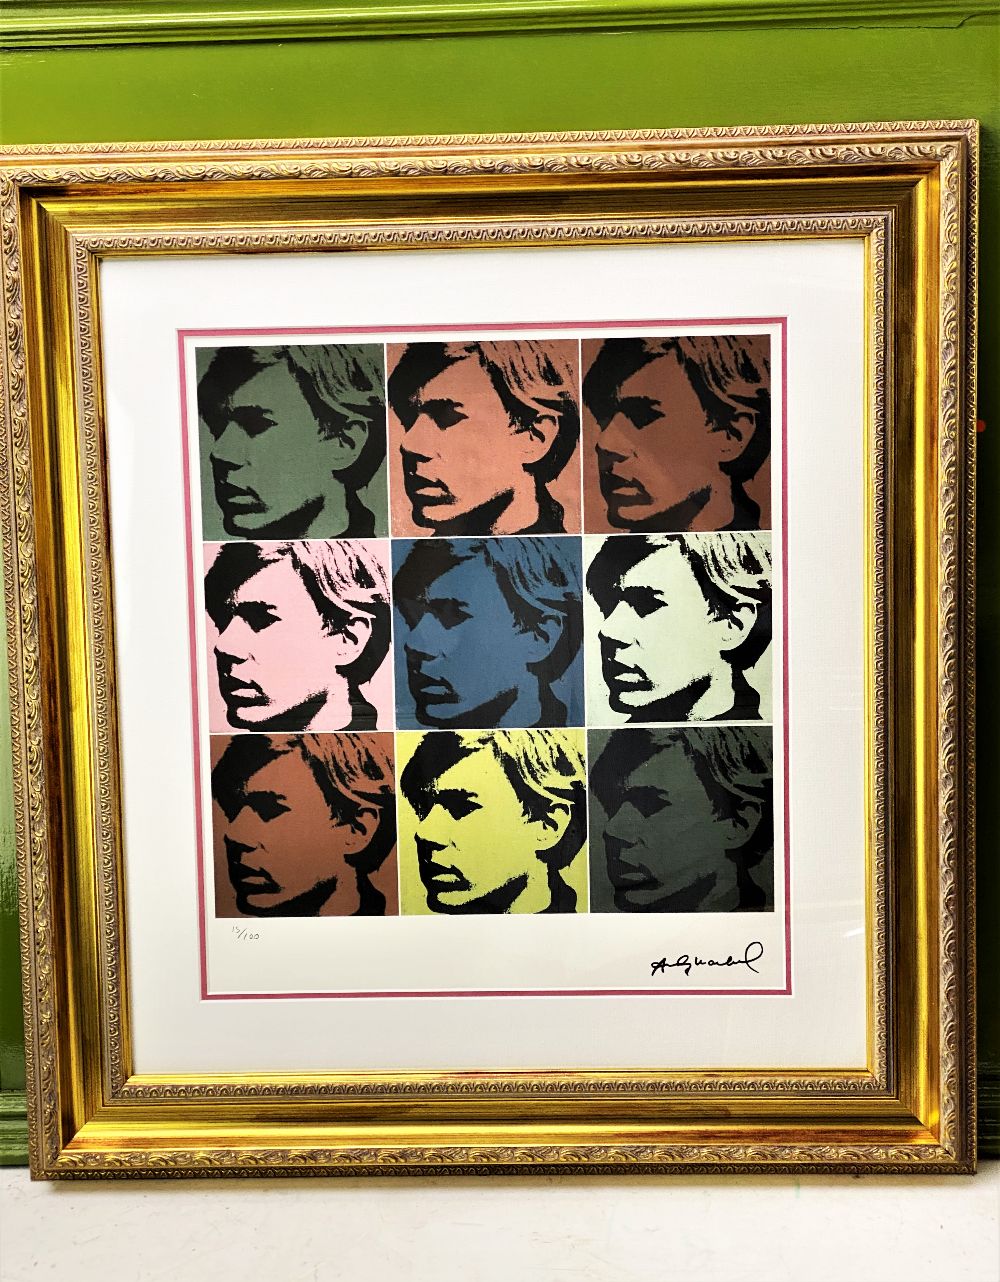 Andy Warhol (1928-1987) “Warhol Self Portrait ” Numbered #15/100 Lithograph, Ornate Framed. - Image 5 of 5